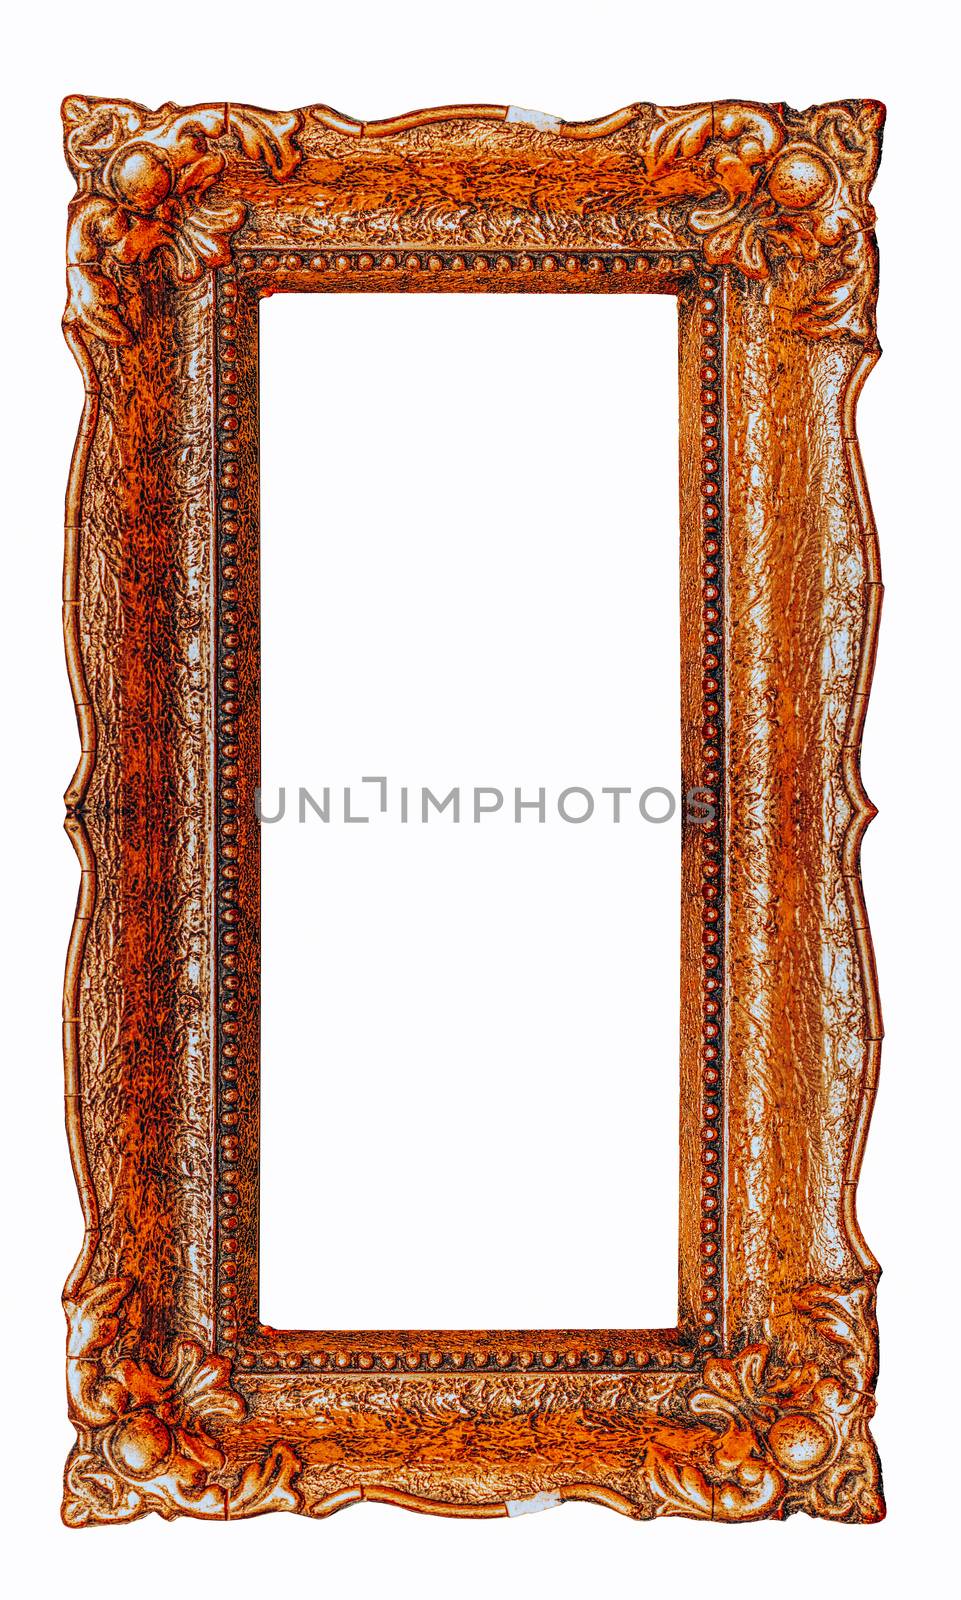 Vertical copper picture frame with white background - Stock imag by adamr